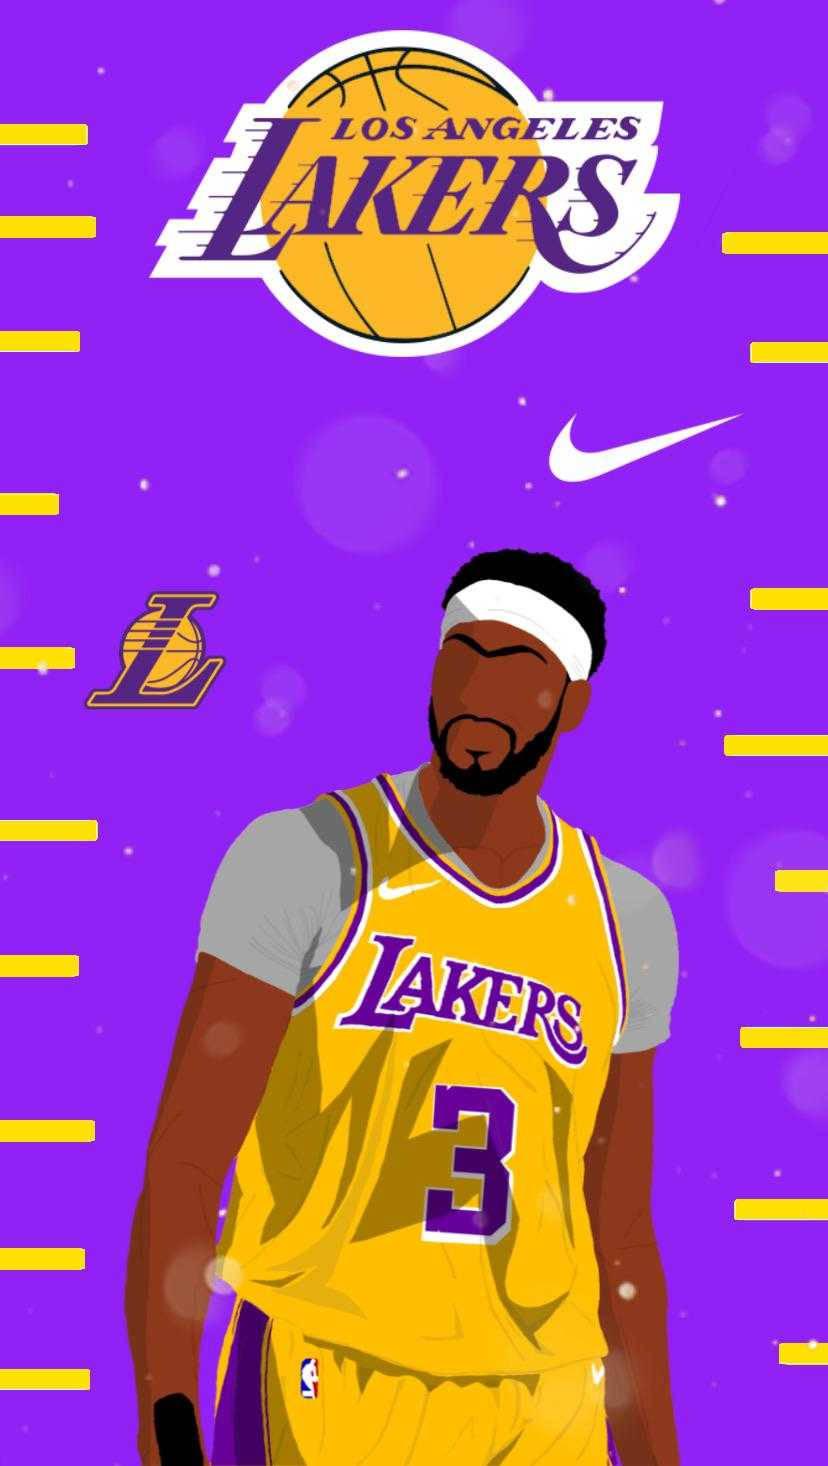 Download Lakers Iphone With James And Davis Wallpaper